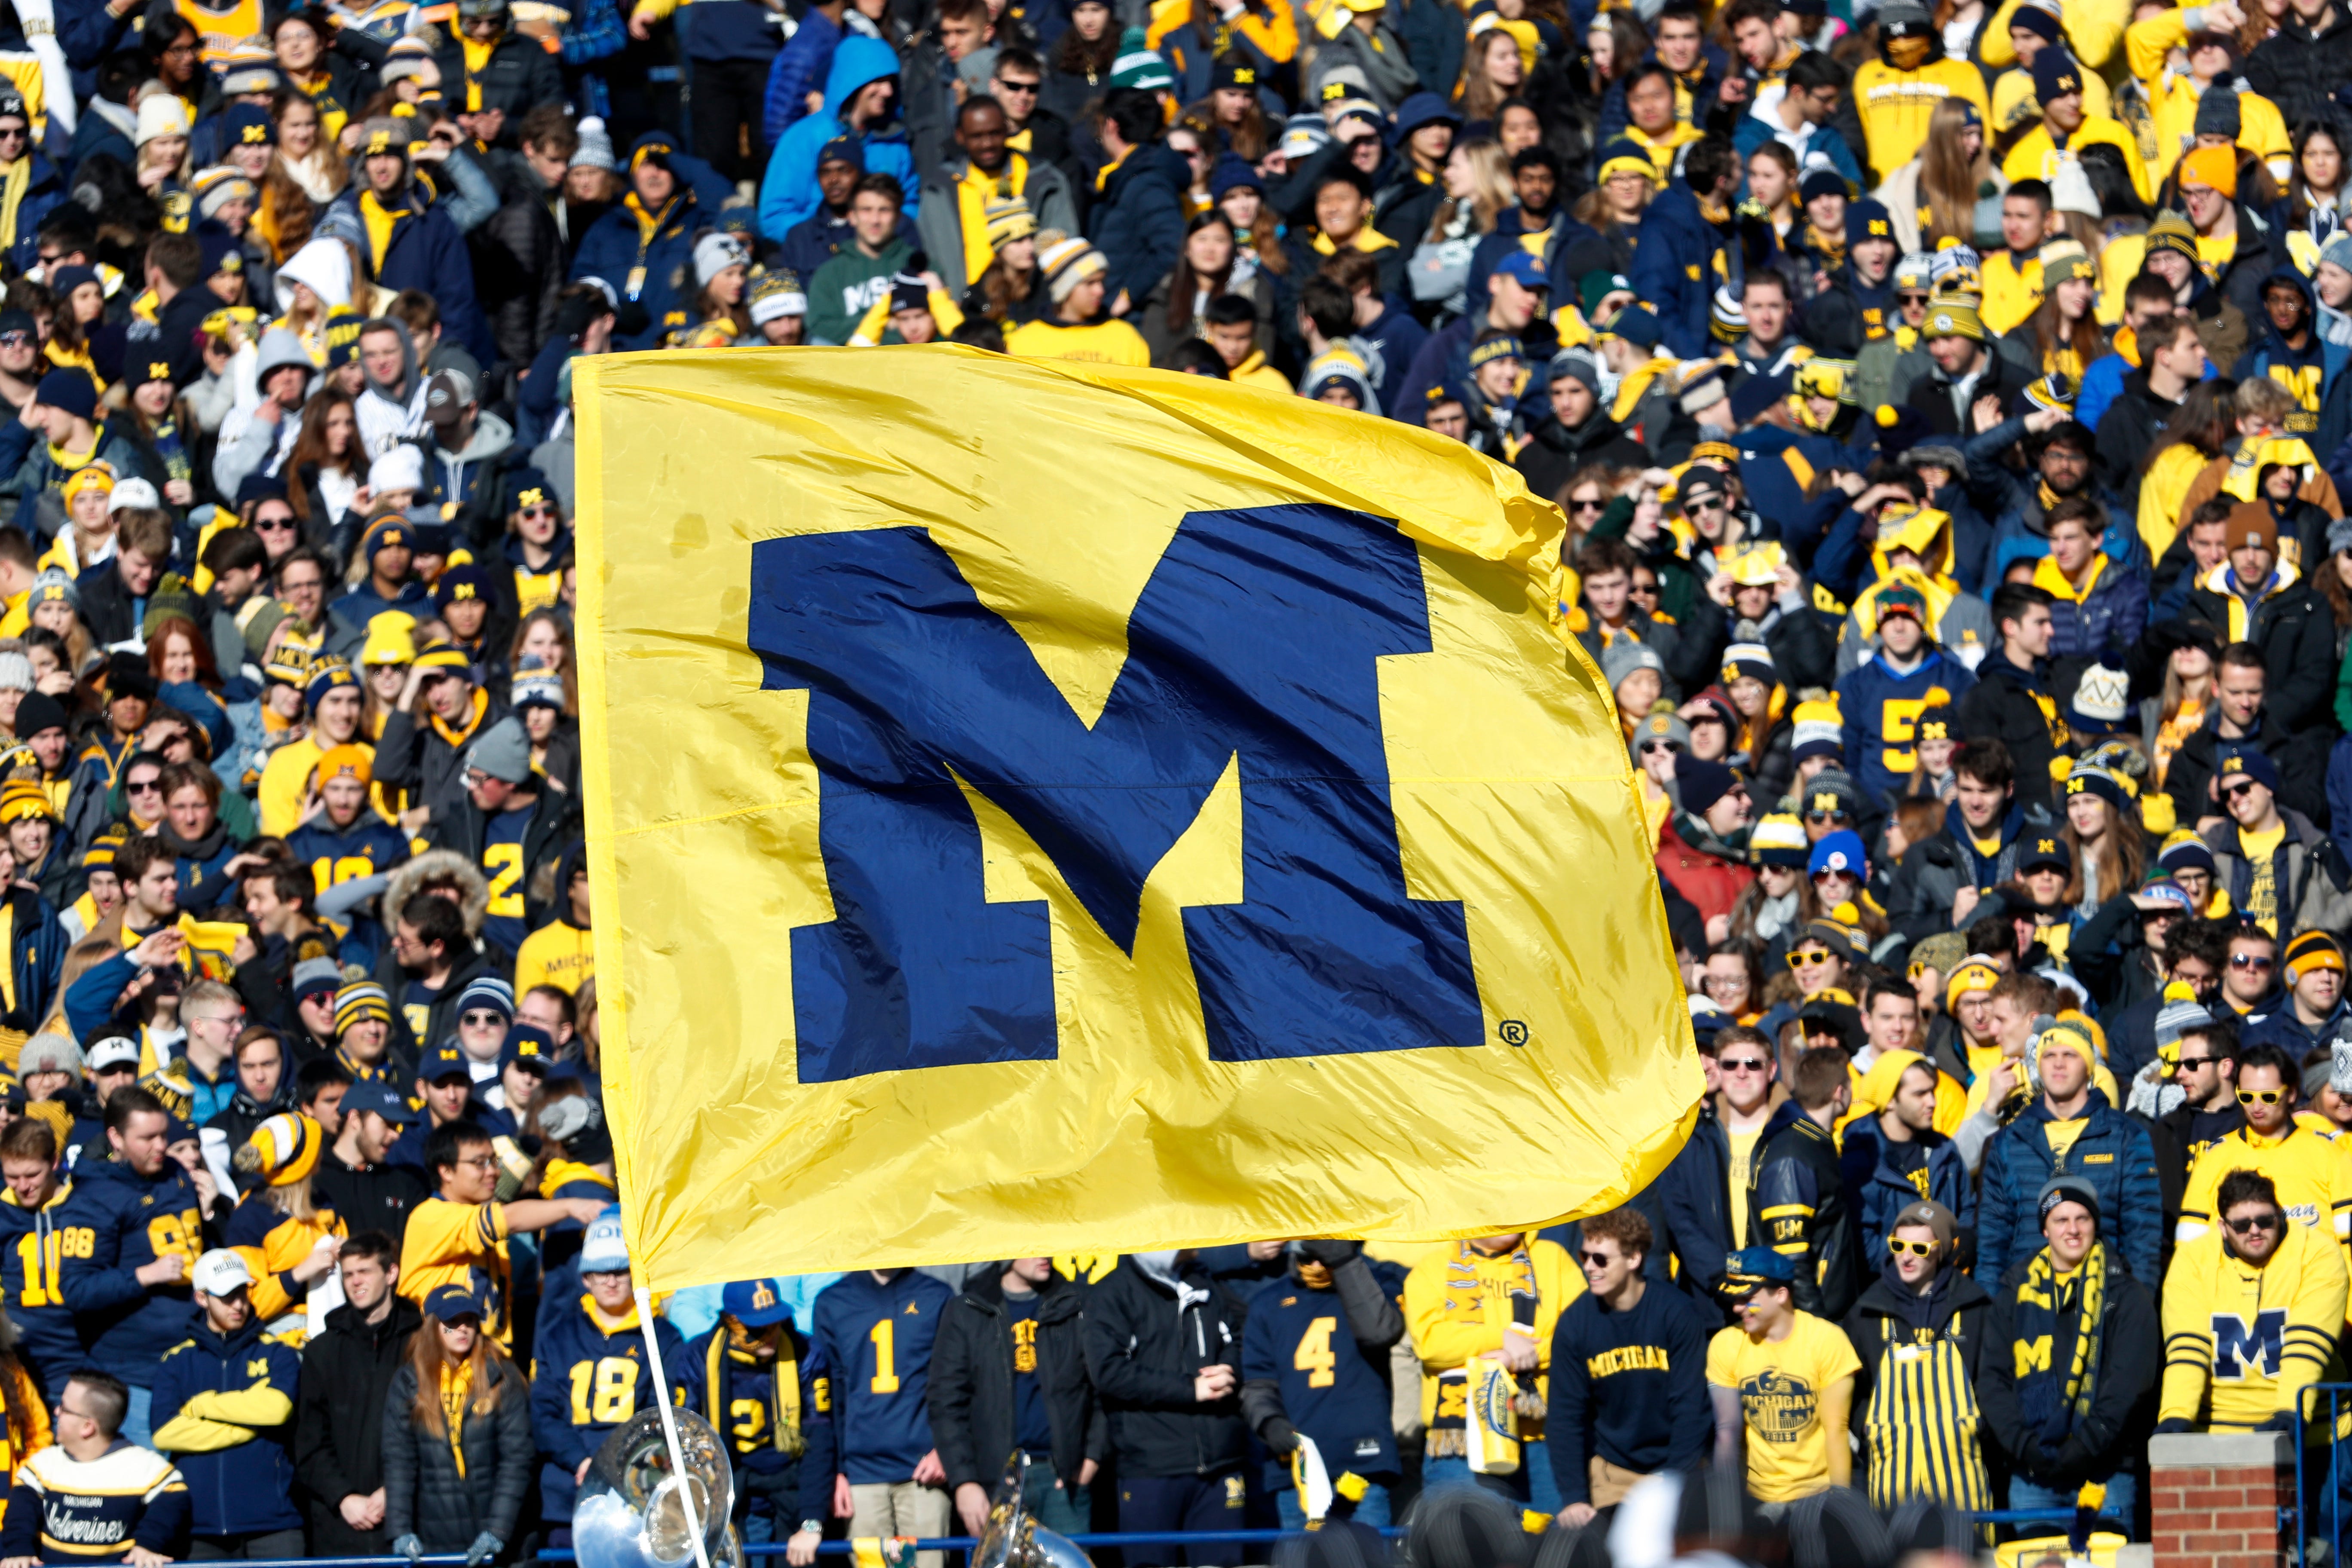 Michigan will open the football season the weekend of Oct. 23-24.